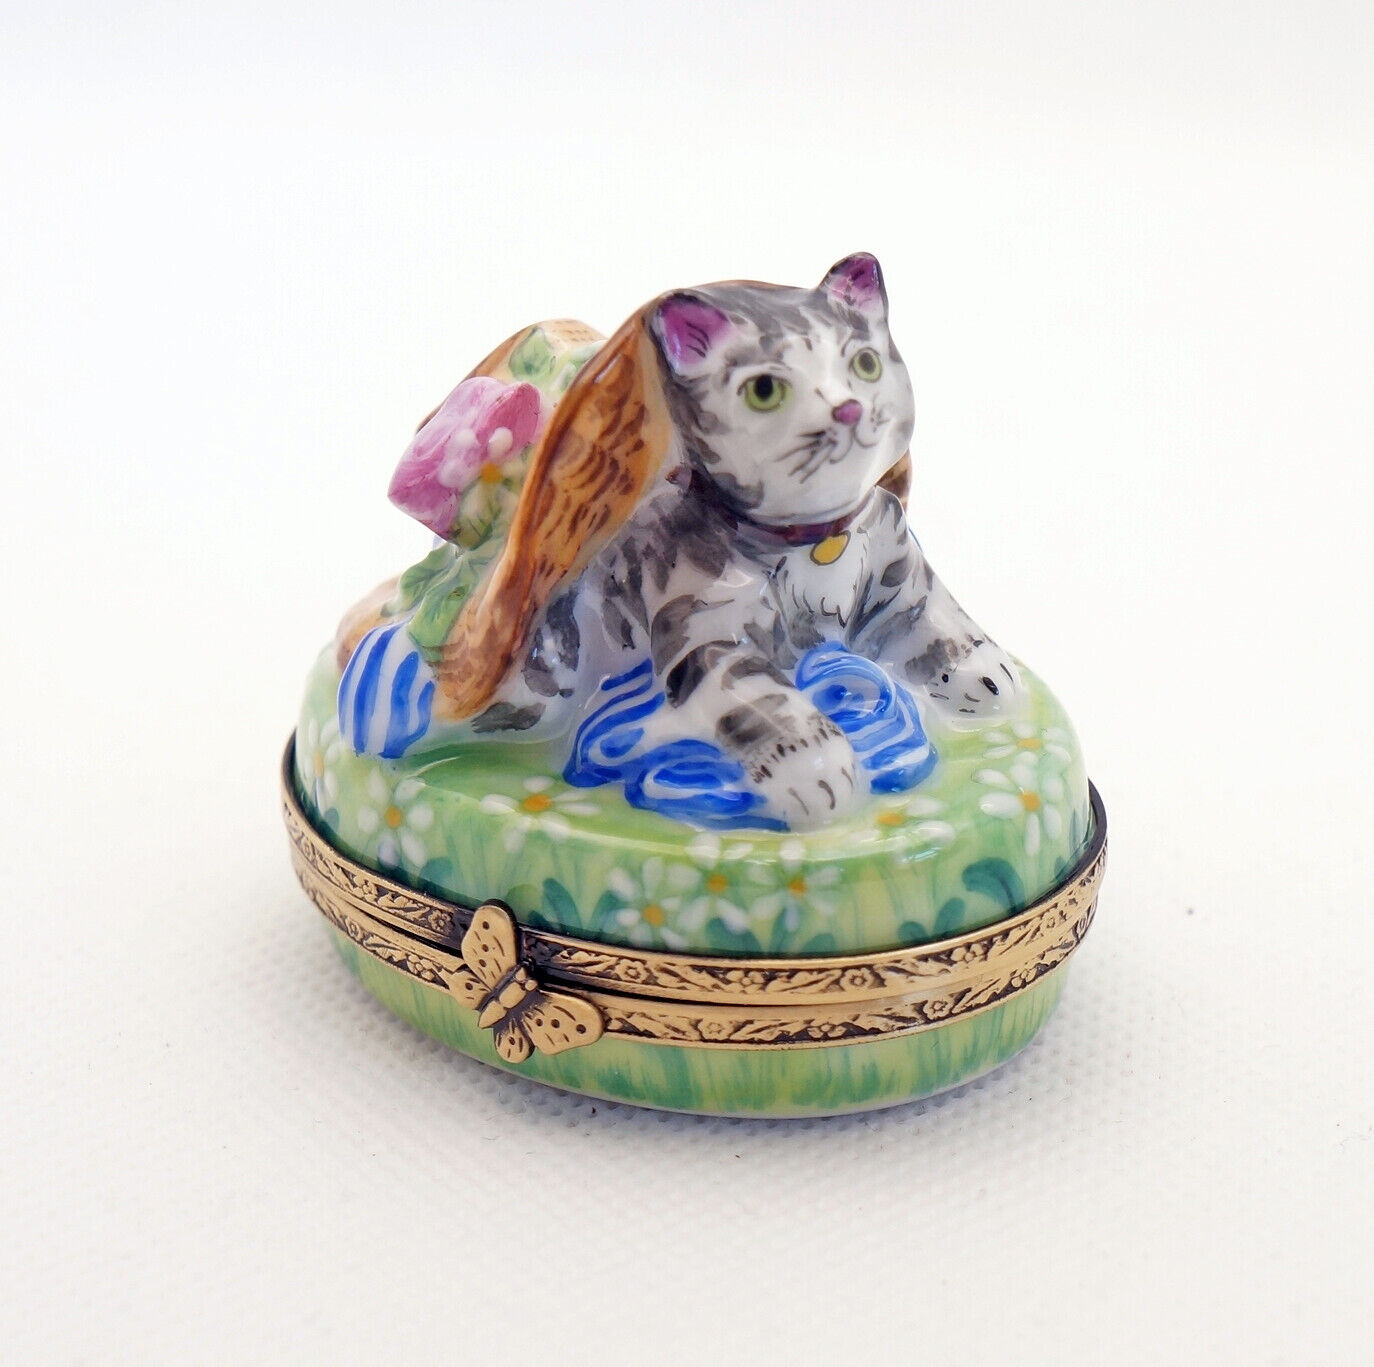 New French Limoges Trinket Box Tiger Striped Tabby Kitty Cat under Amazing Hat